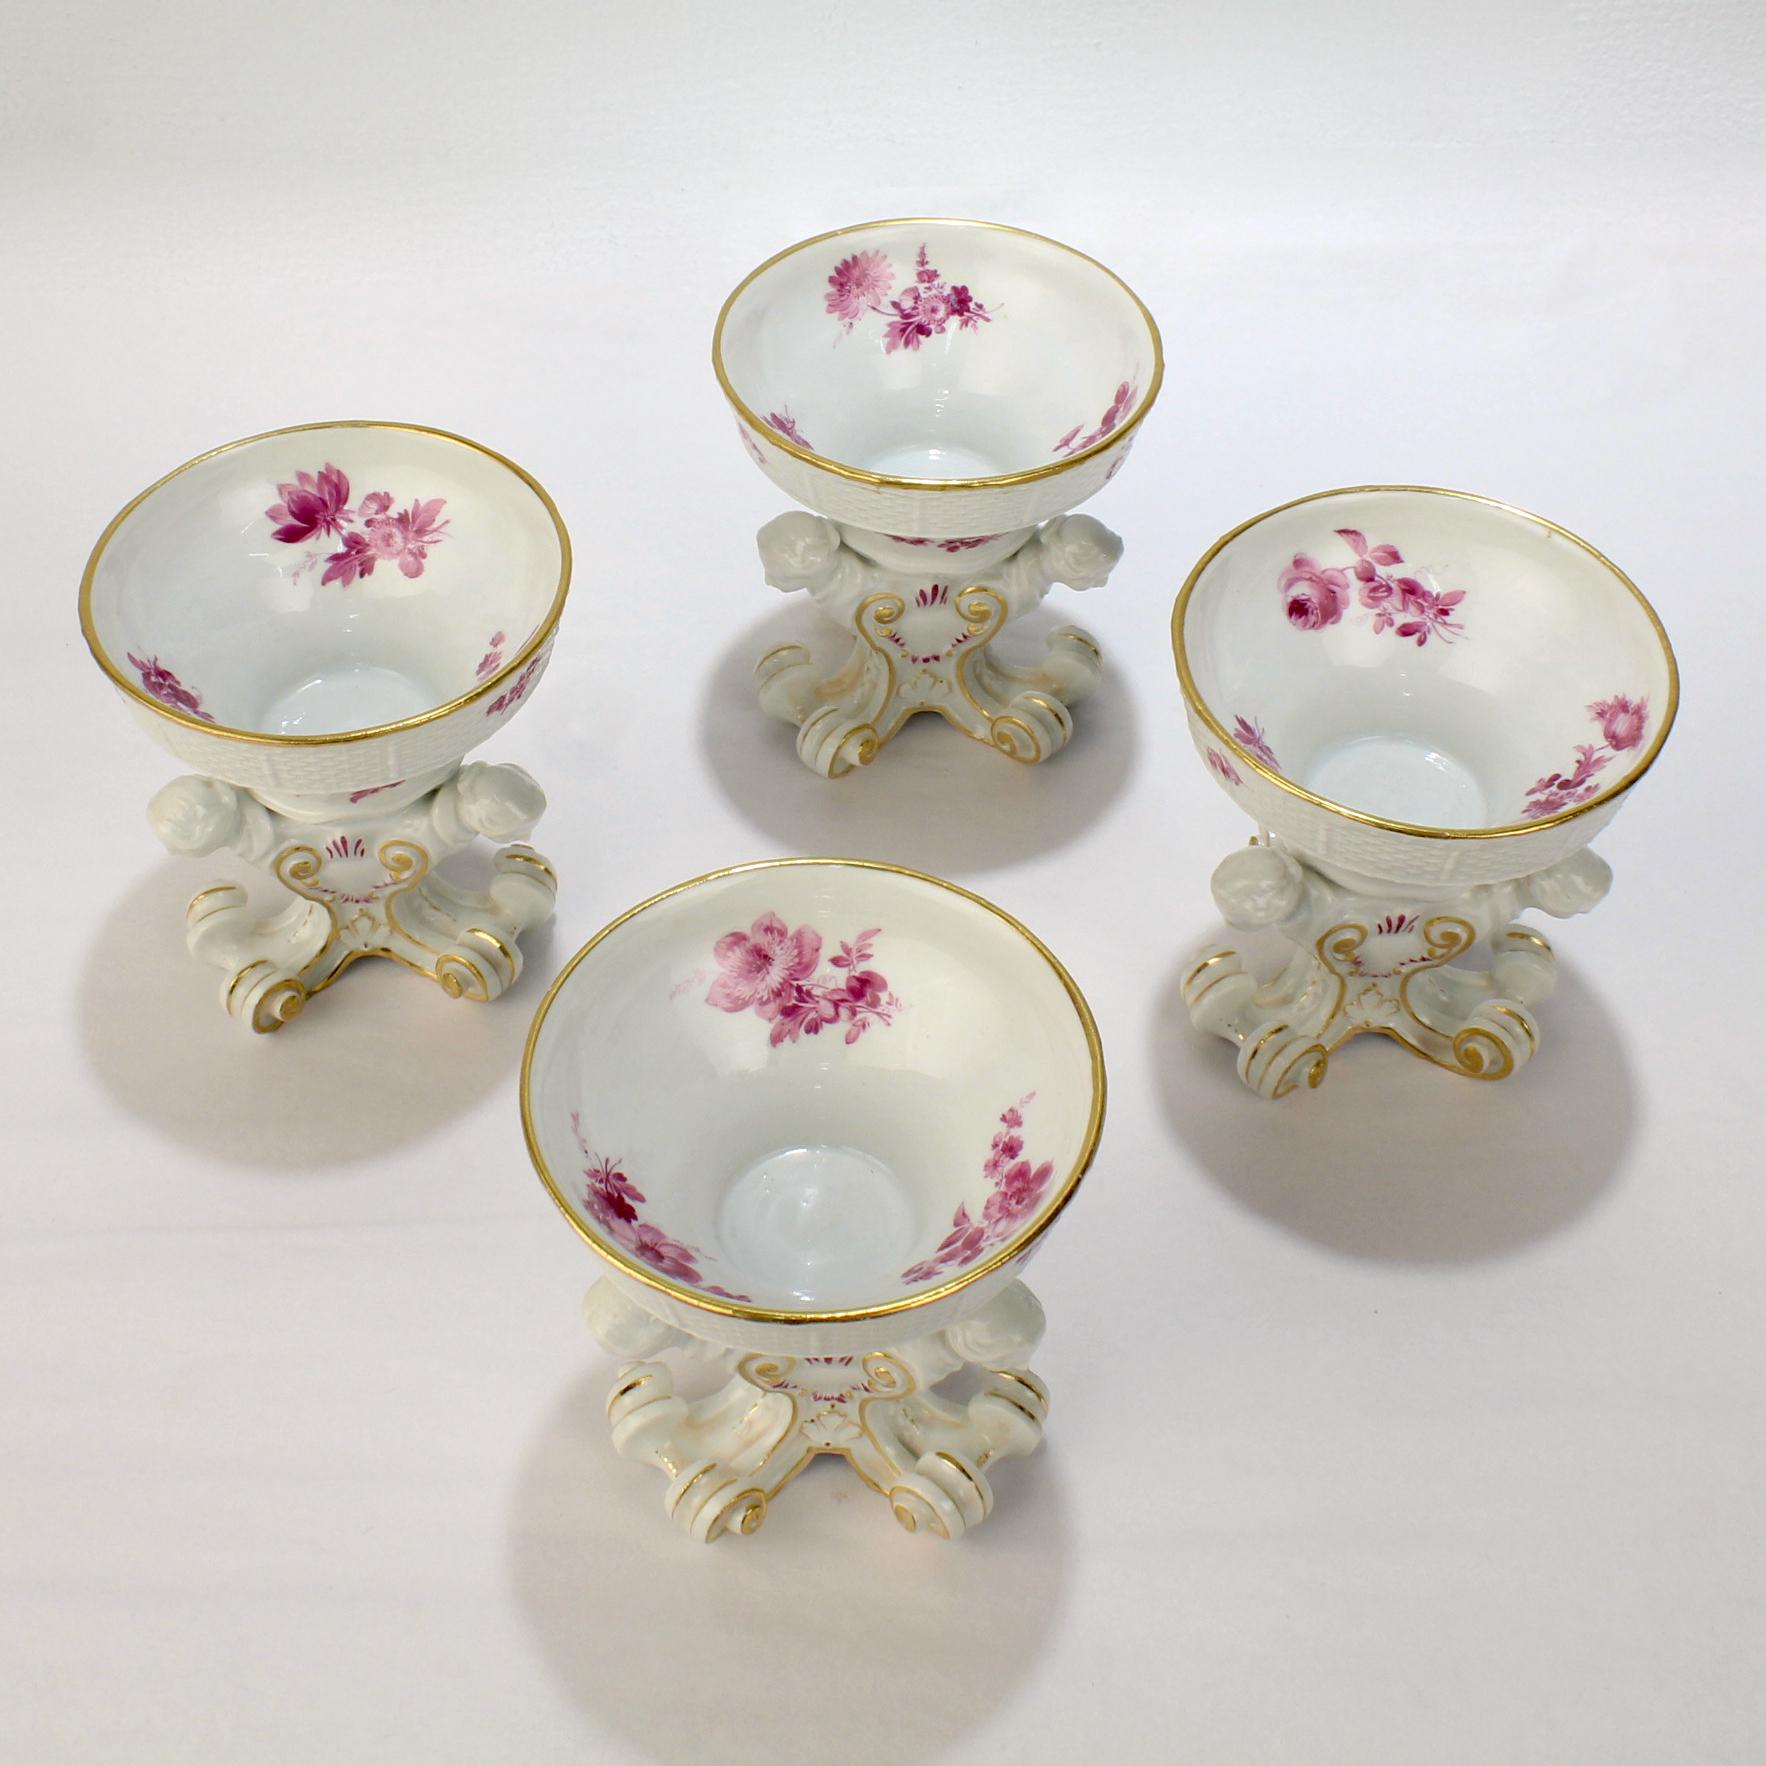 Rococo 4 Antique Meissen Porcelain Footed Frauenkopf Salt Cellars with Puce Flowers For Sale